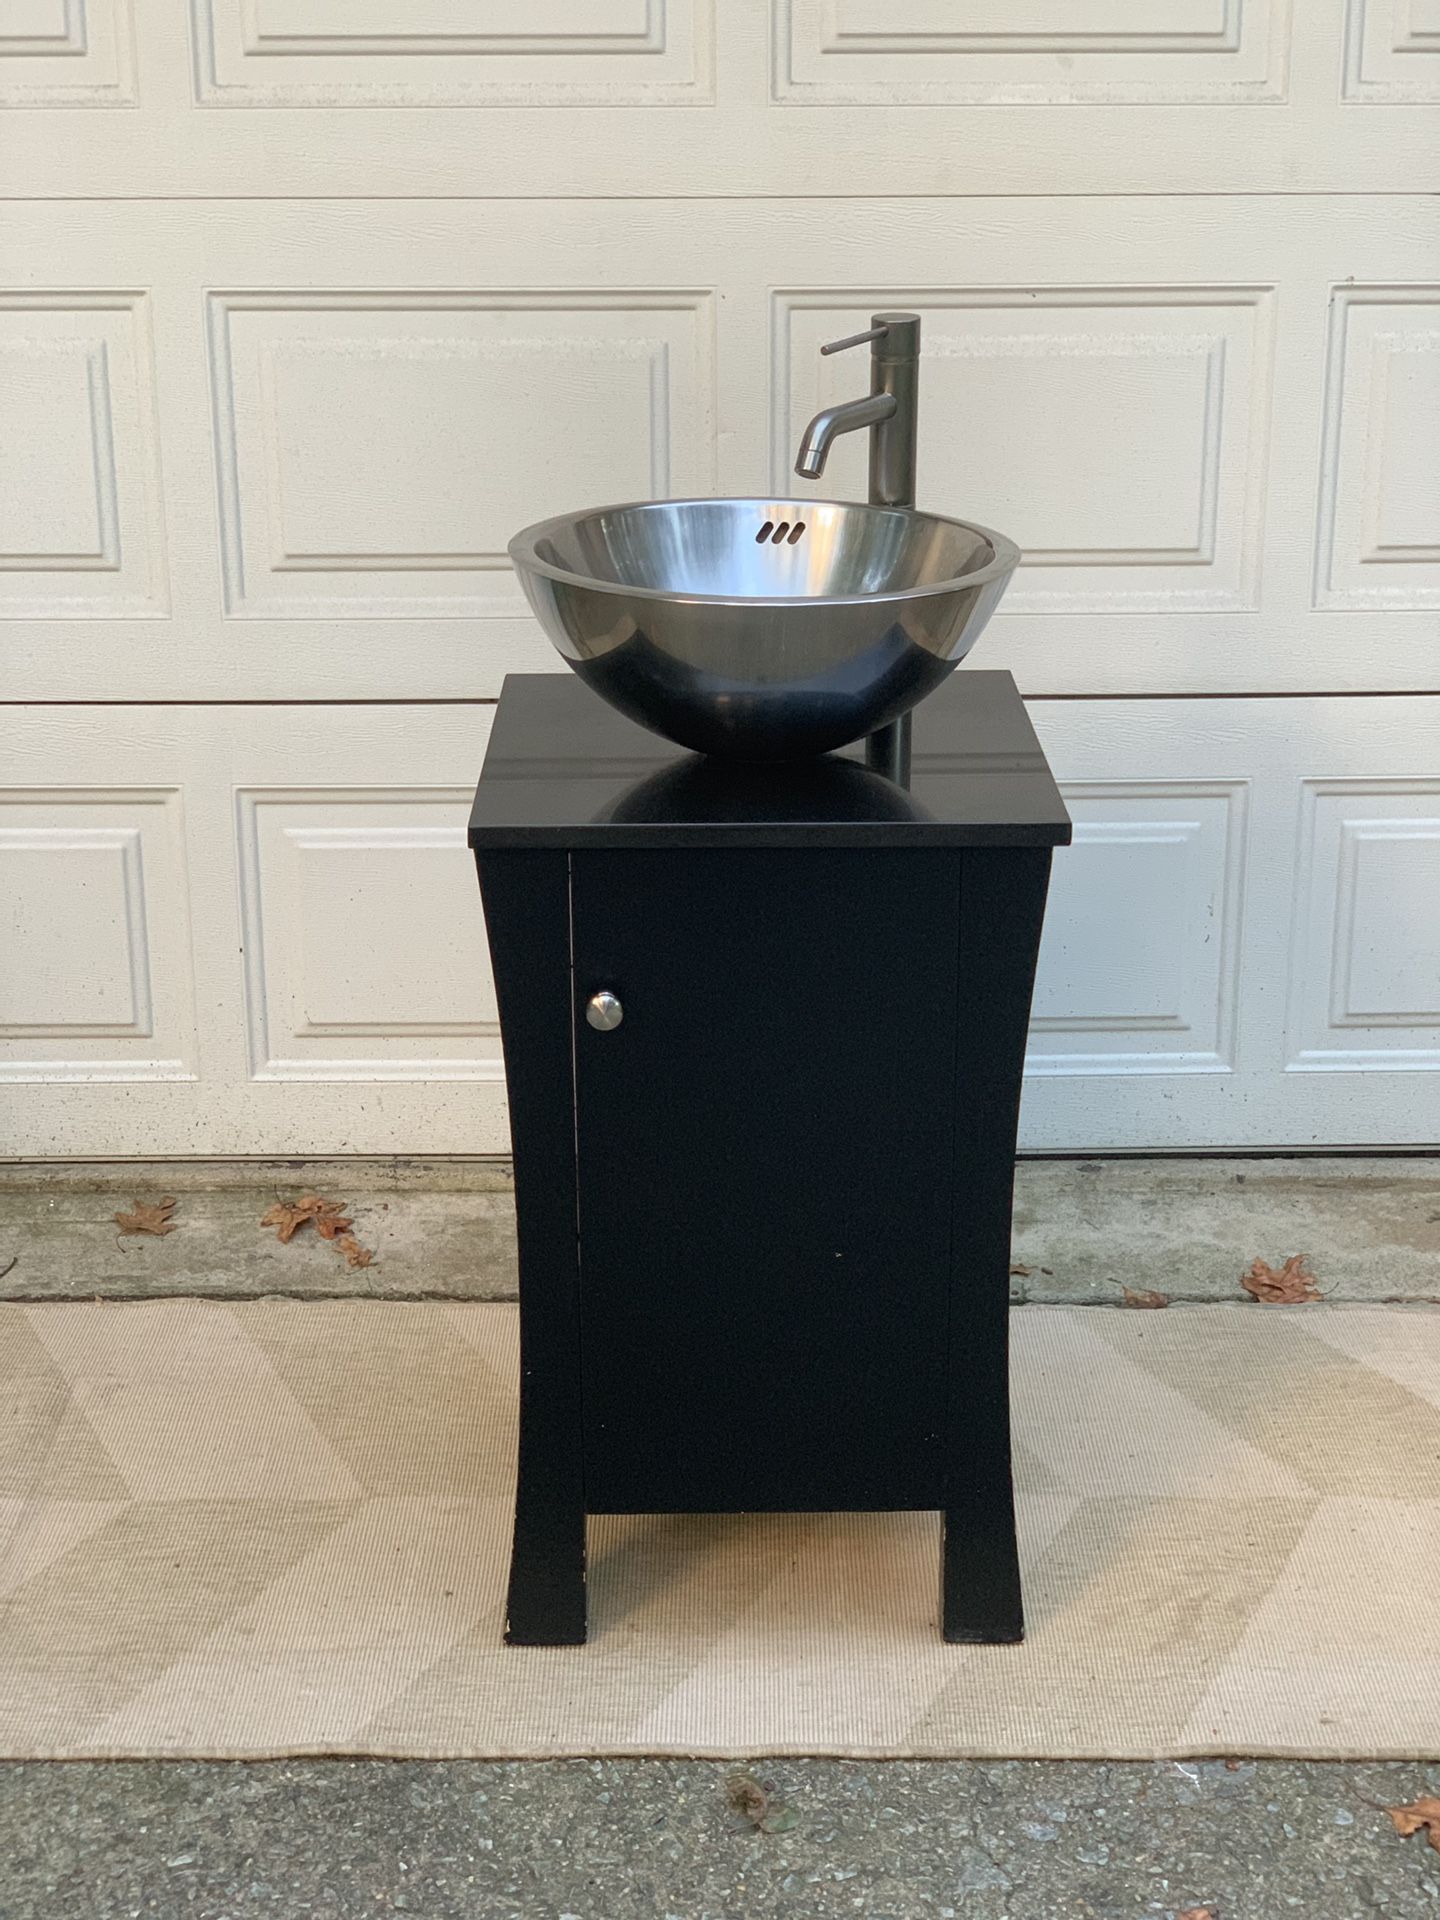 Contemporary double-wall stainless steel vessel sink with a dark brown wooden vanity